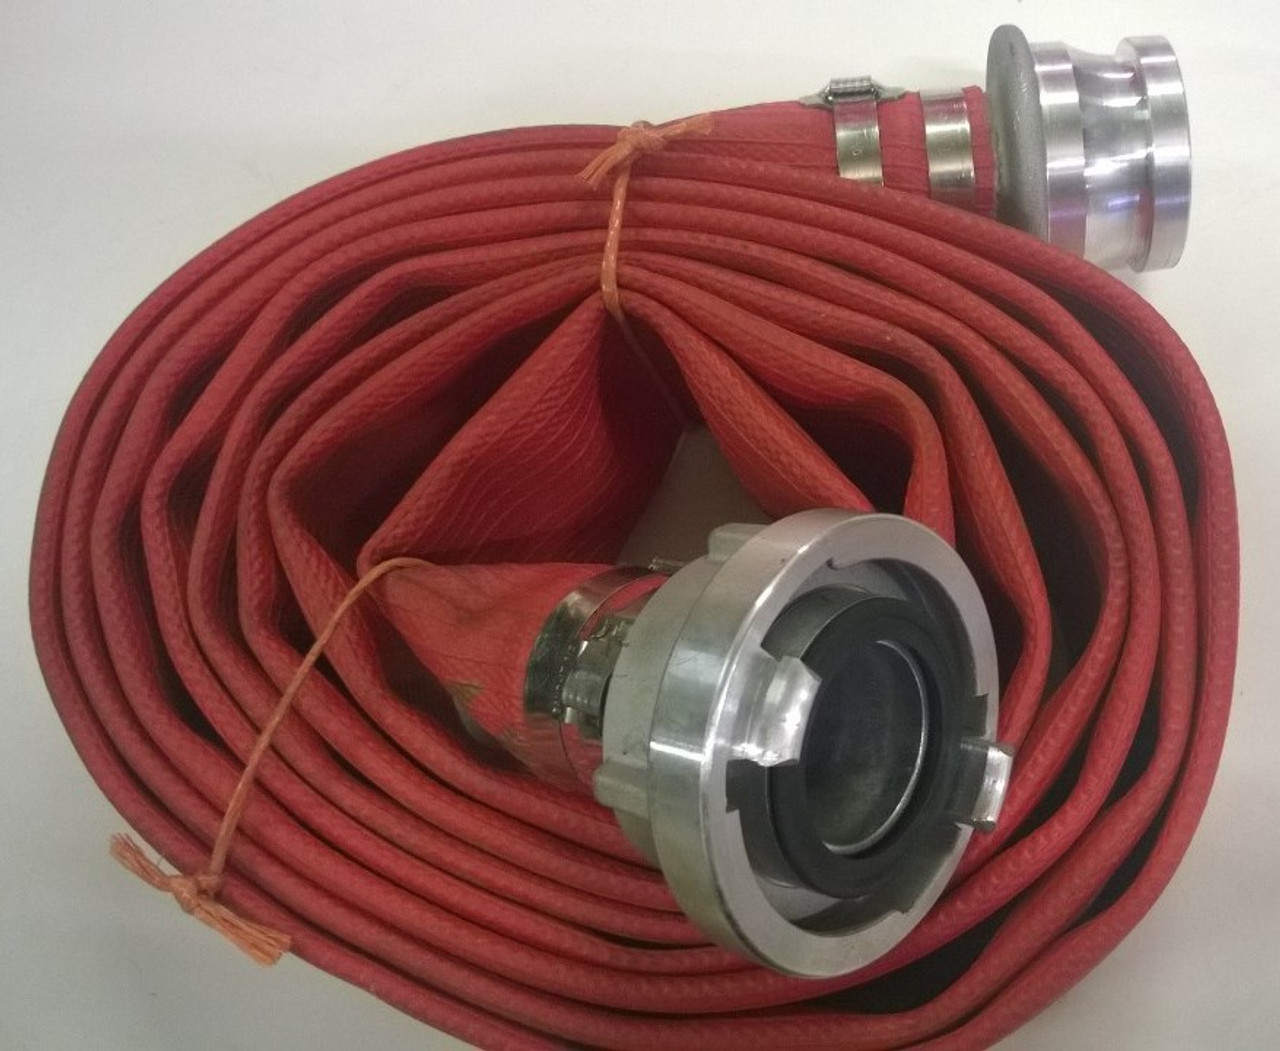 5m x 50mm (2 ½) Hydrant Hose, Male Instantaneous to 66mm Storz EU